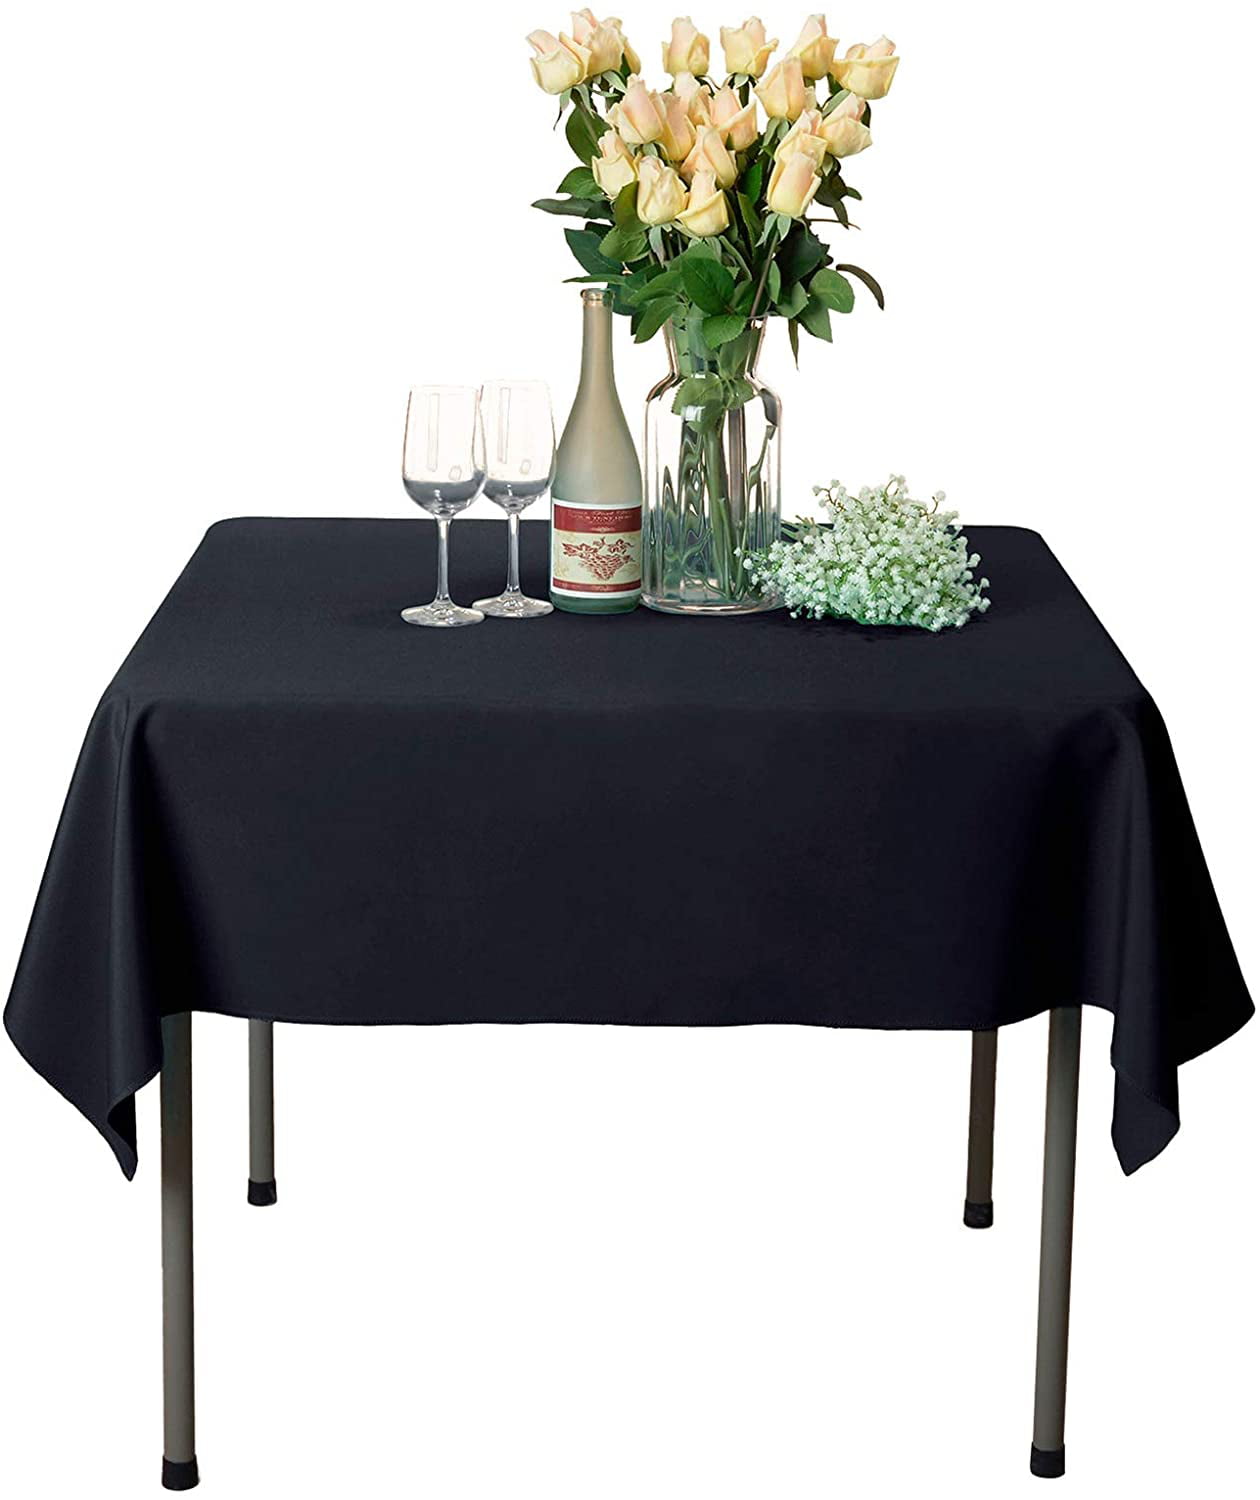 Plus Size Square Polyester Fabric Flower Tablecloth Banquet Table Cover 